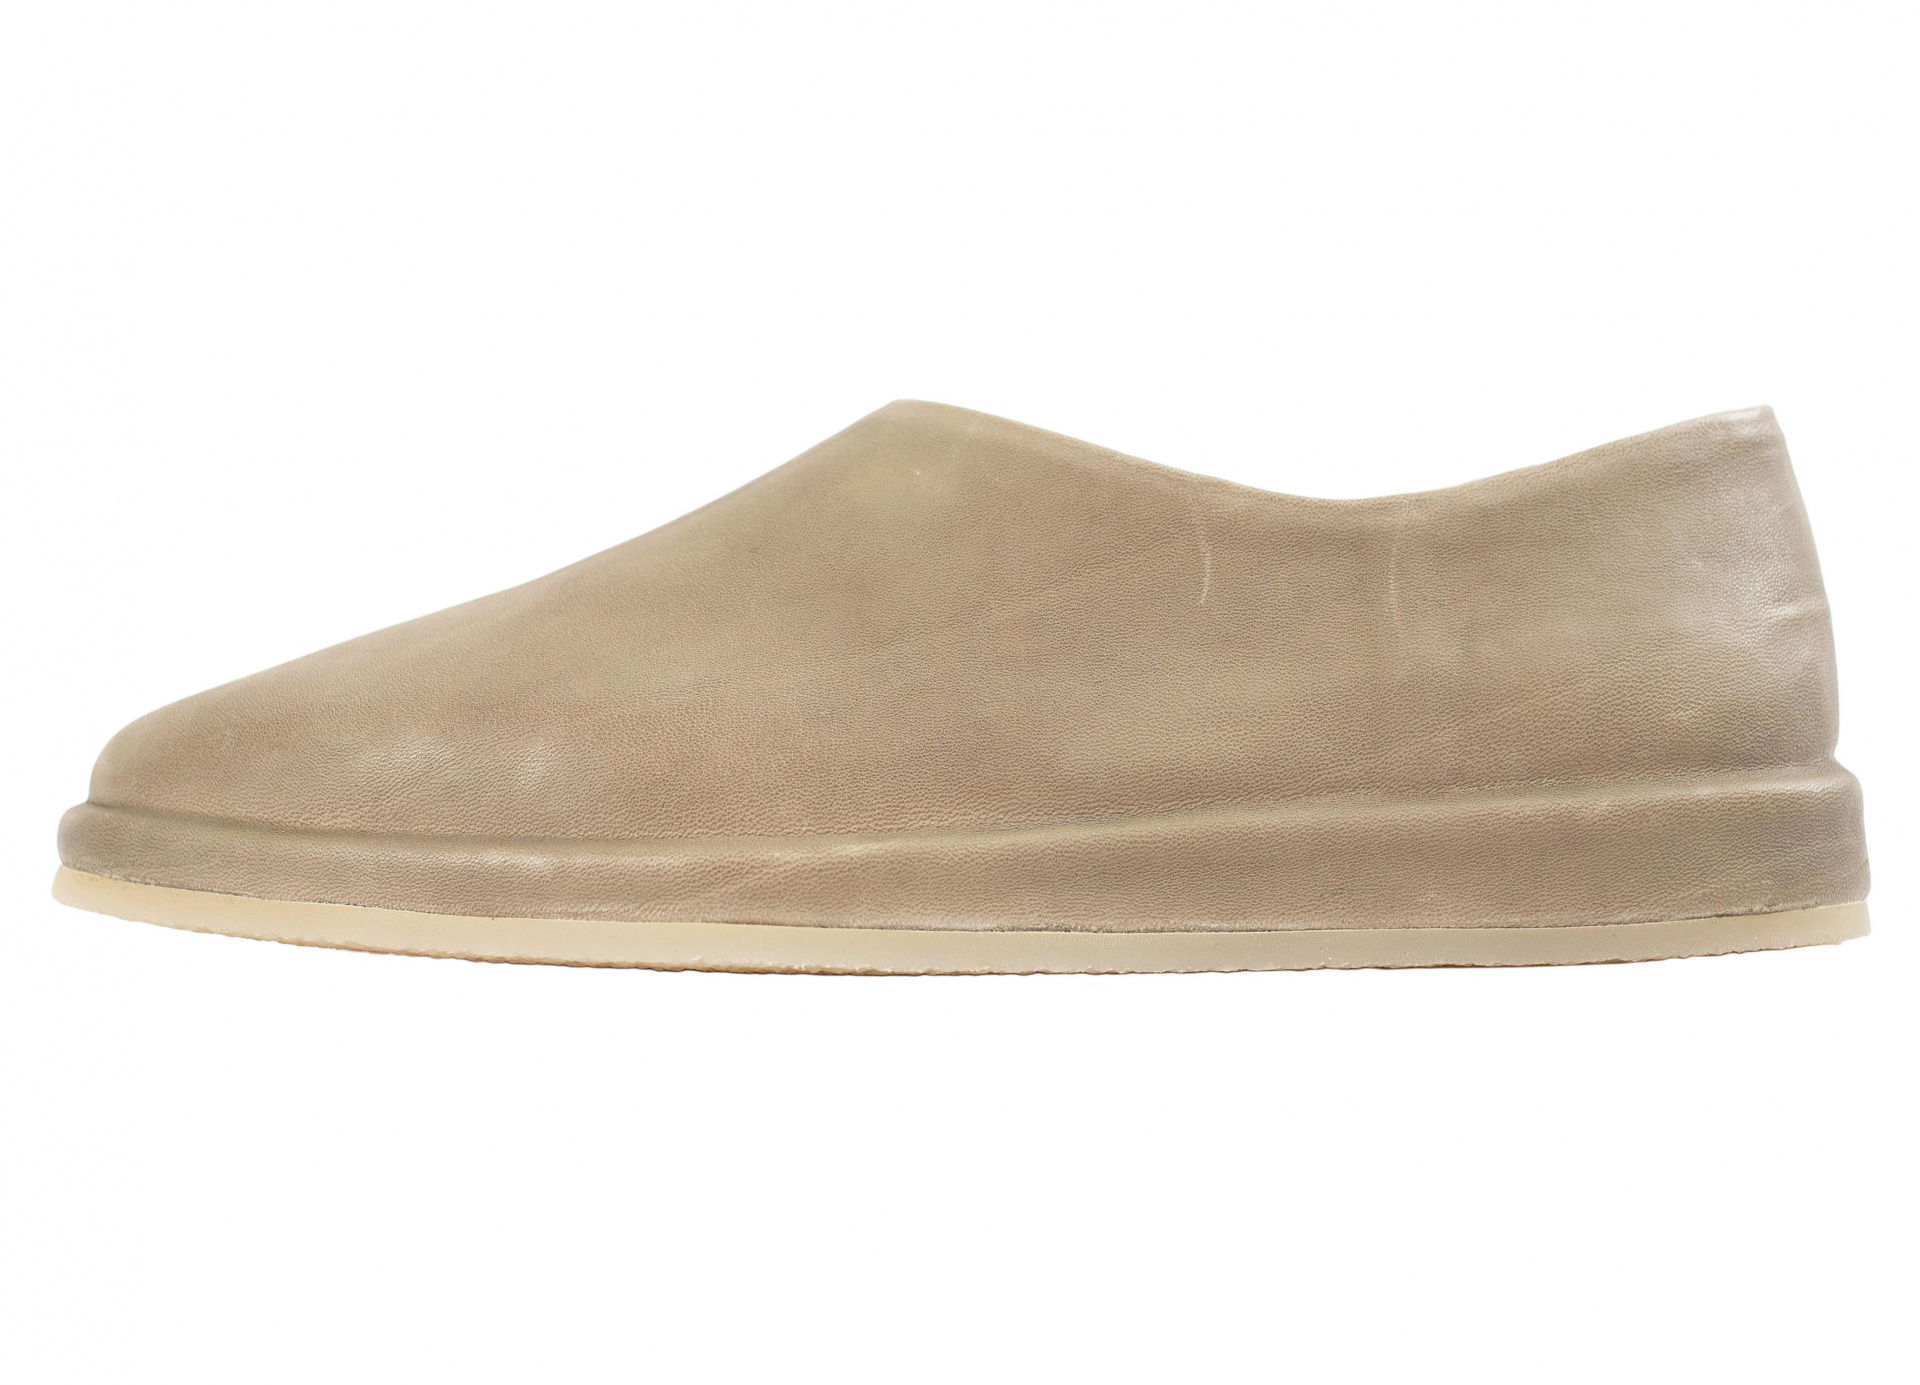 Shop Fear of God slip-ons and loafers for women online at SV77